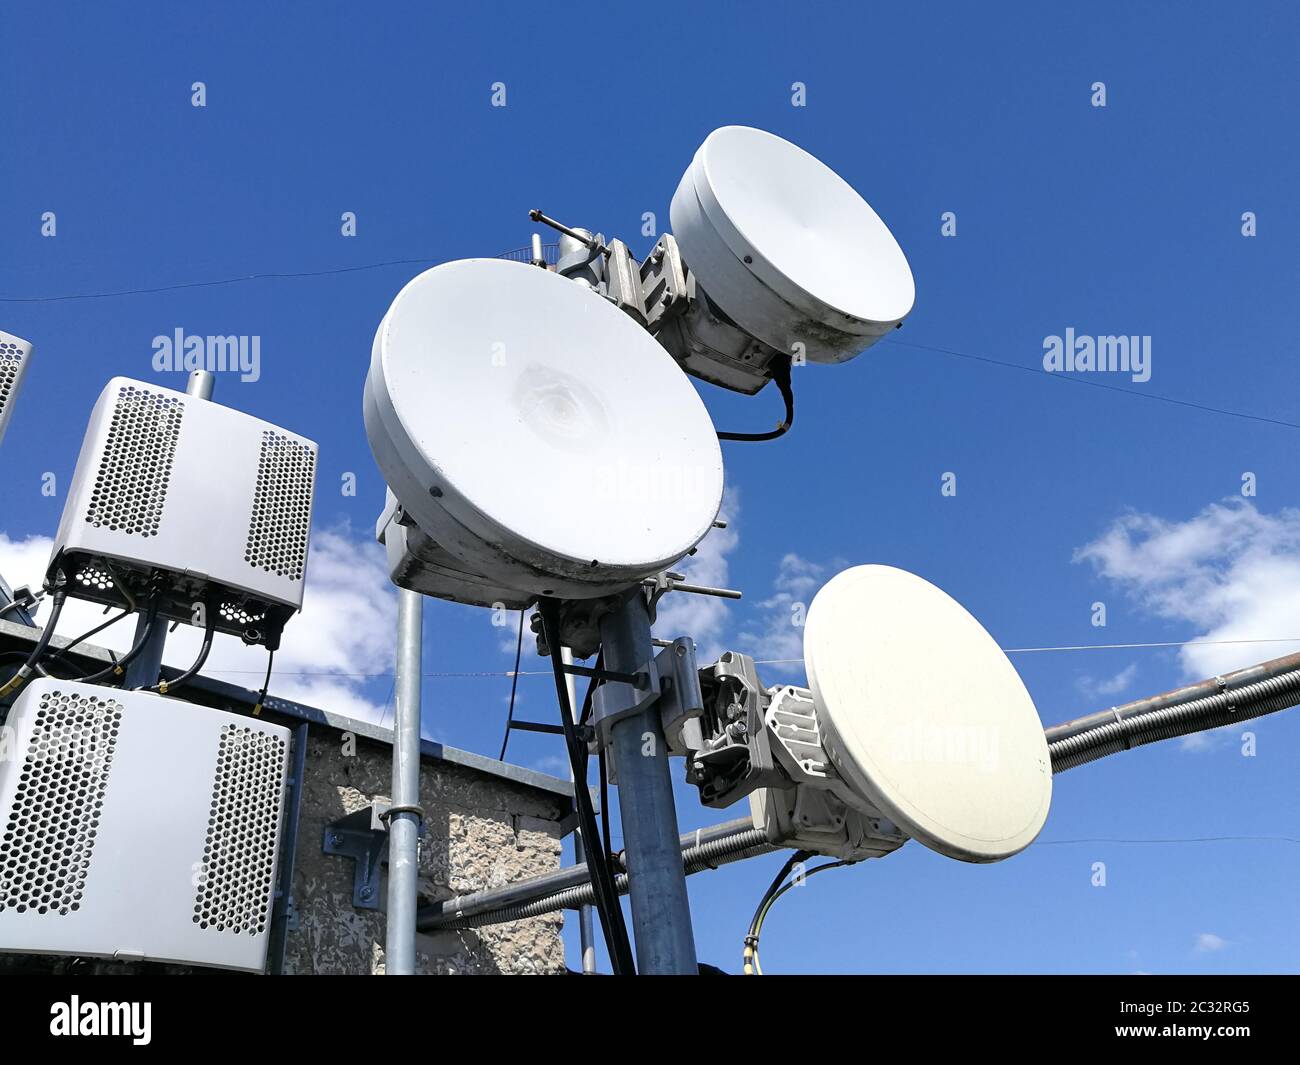 GSM (Global System for Mobile communication) base station and repeater  tower in front of blue cloudy sky for telecommunications Stock Photo - Alamy